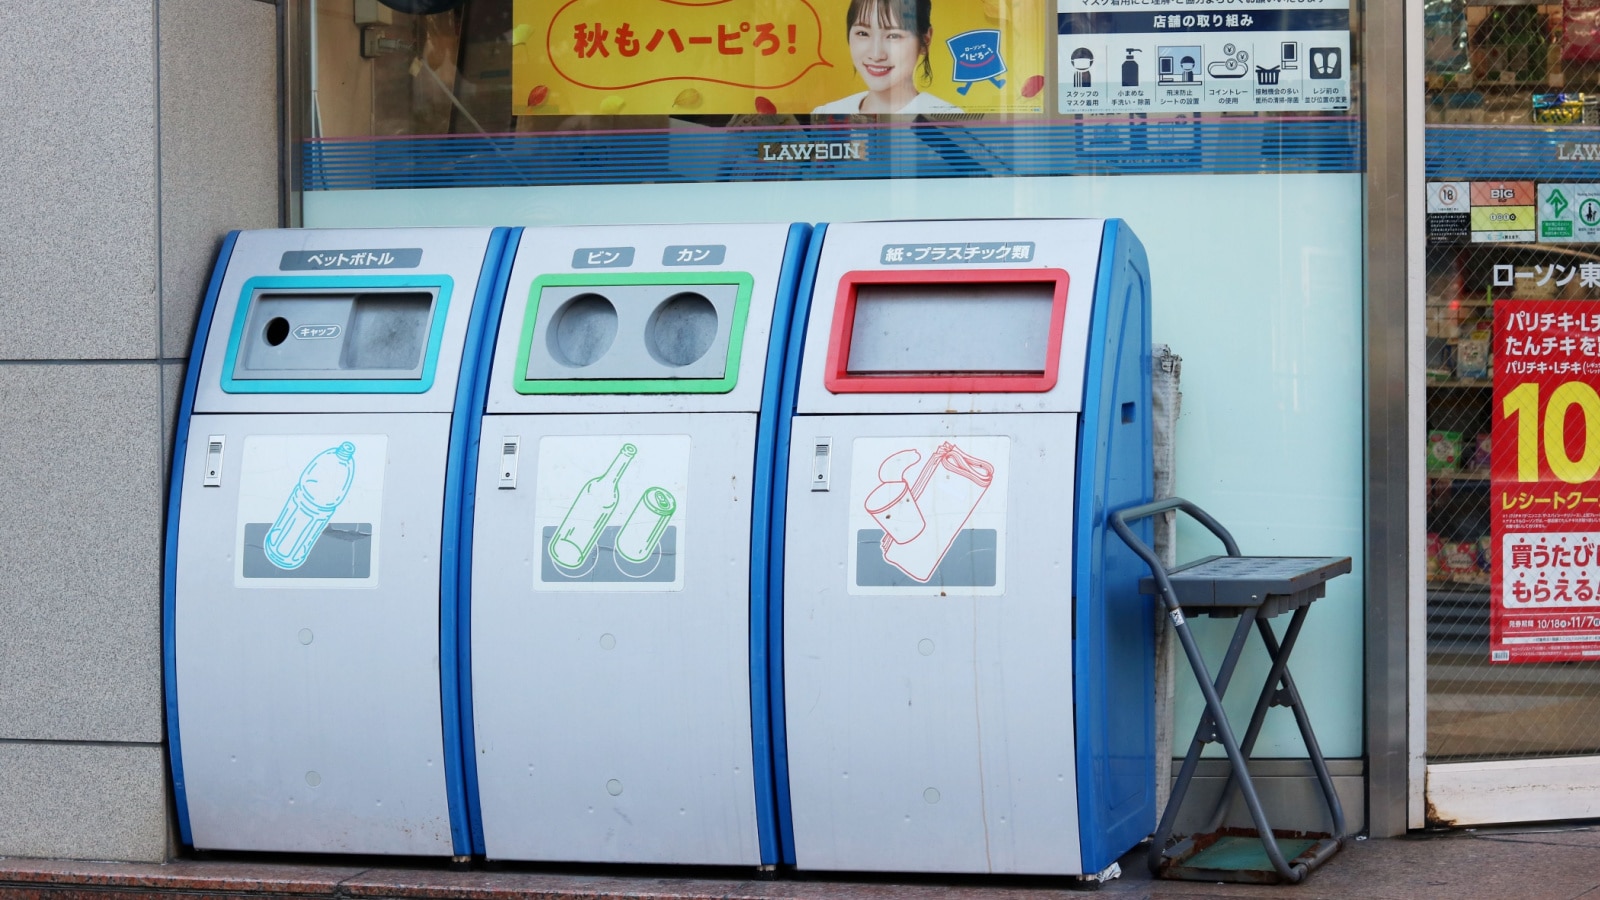 TOKYO, JAPAN - November 3, 2022: Waste containers for different kinds of trash (plastic bottles; bottles and cans; paper and plastic) outside a Lawson convenience store in Tokyo's Koto Ward.